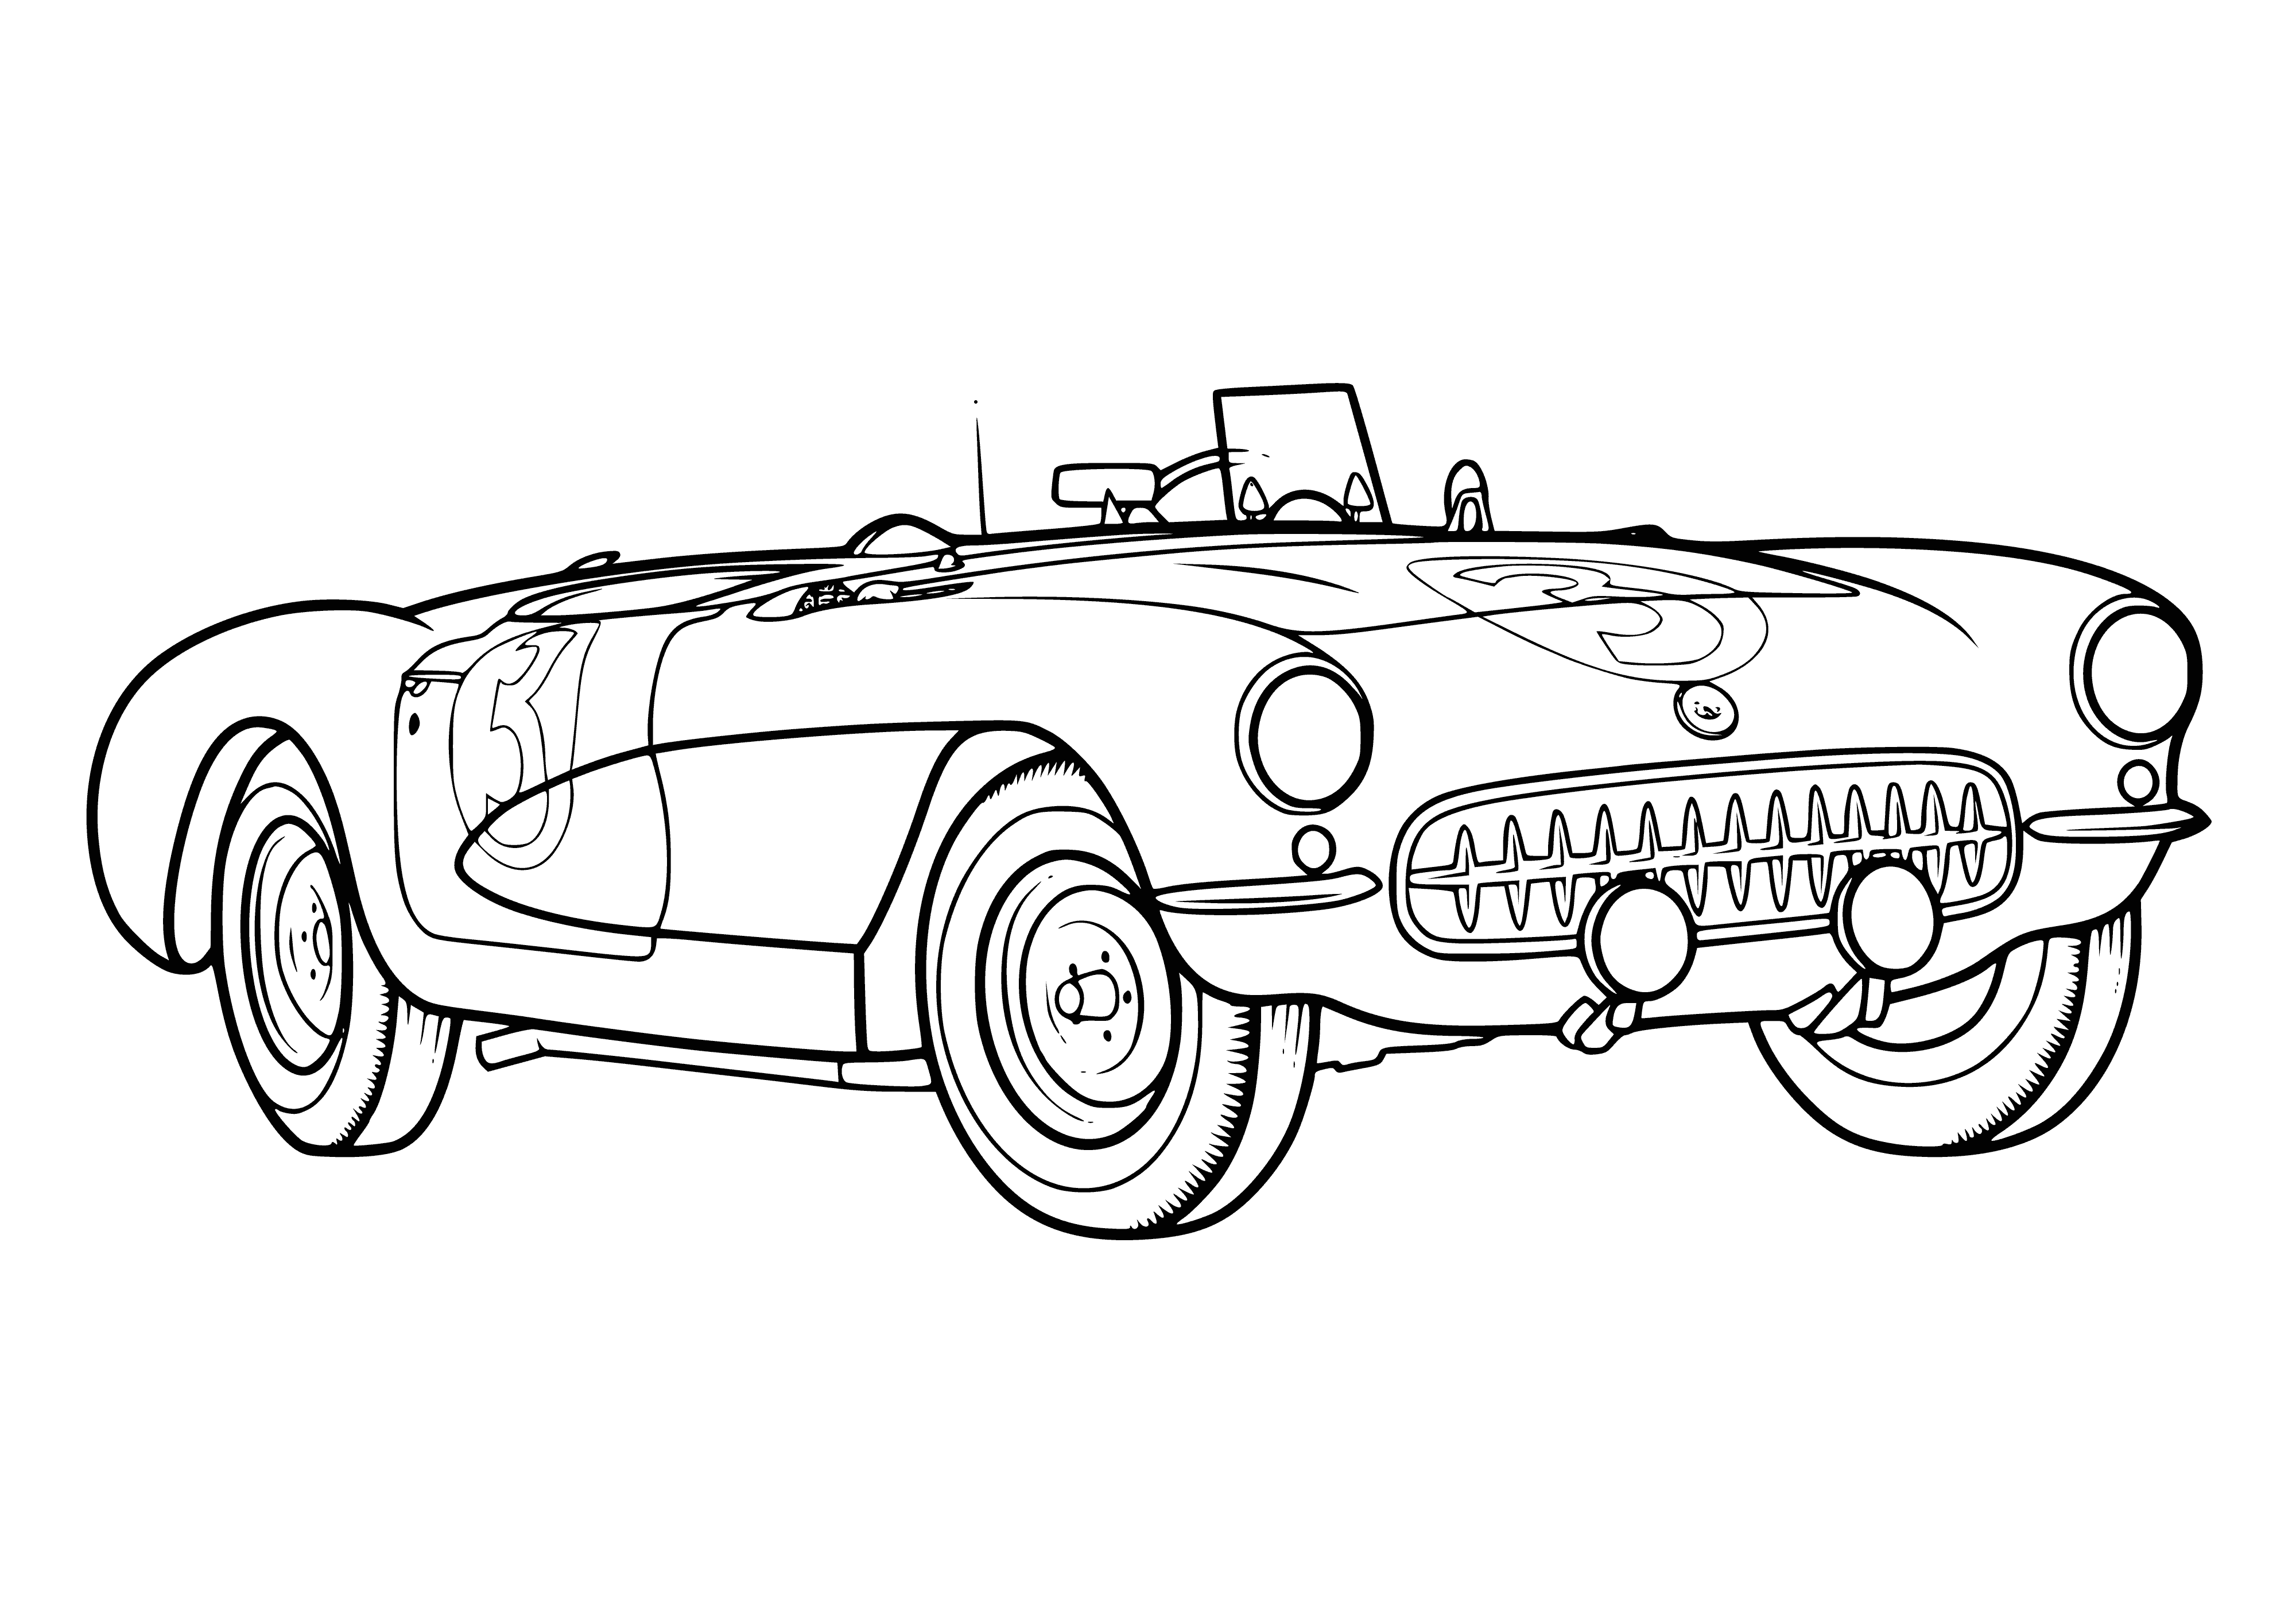 coloring page: A blue car with a top down, chrome grille & white stripes, sits on a road surrounded by trees with chrome-rimmed white walls.